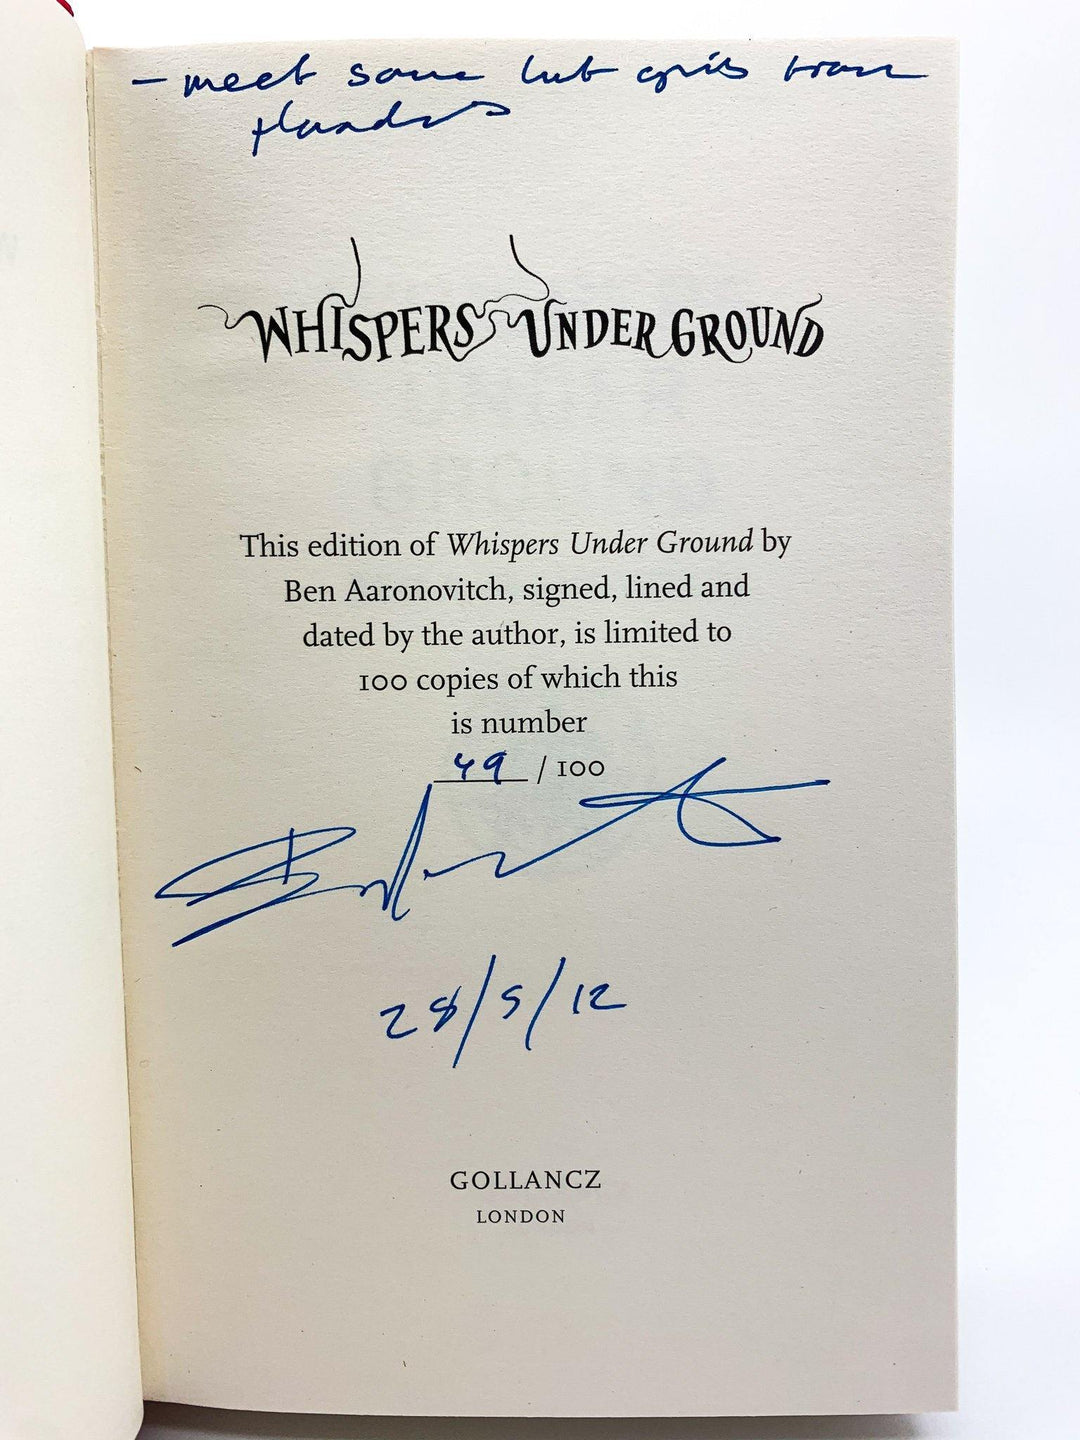 Aaronovitch, Ben - Whispers Under Ground - SIGNED | signature page